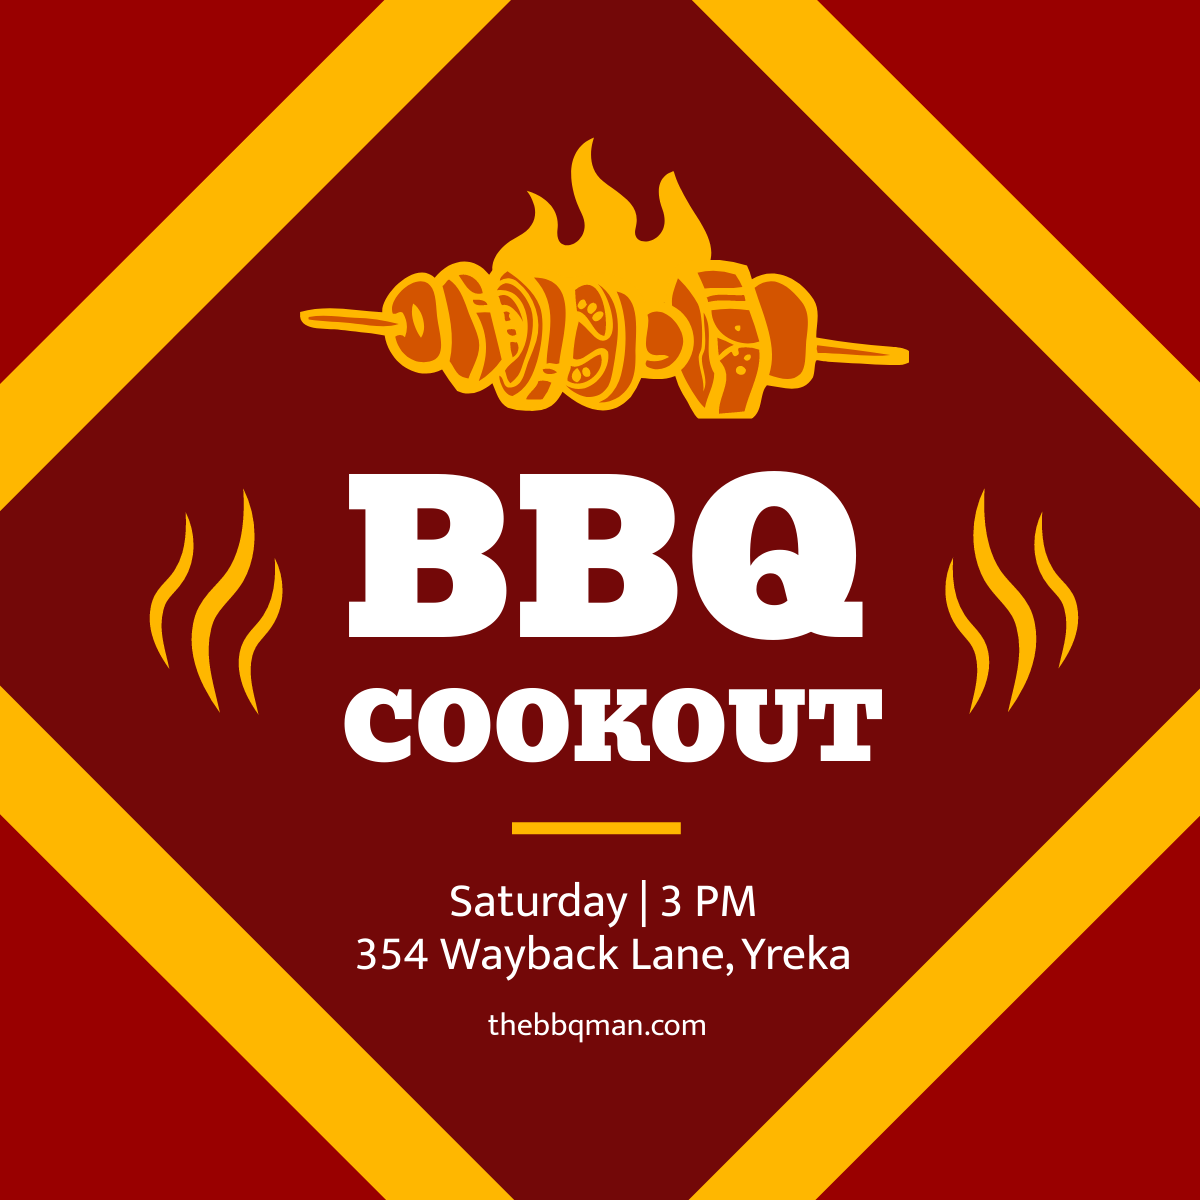 BBQ Cookout Linkedin Post Template